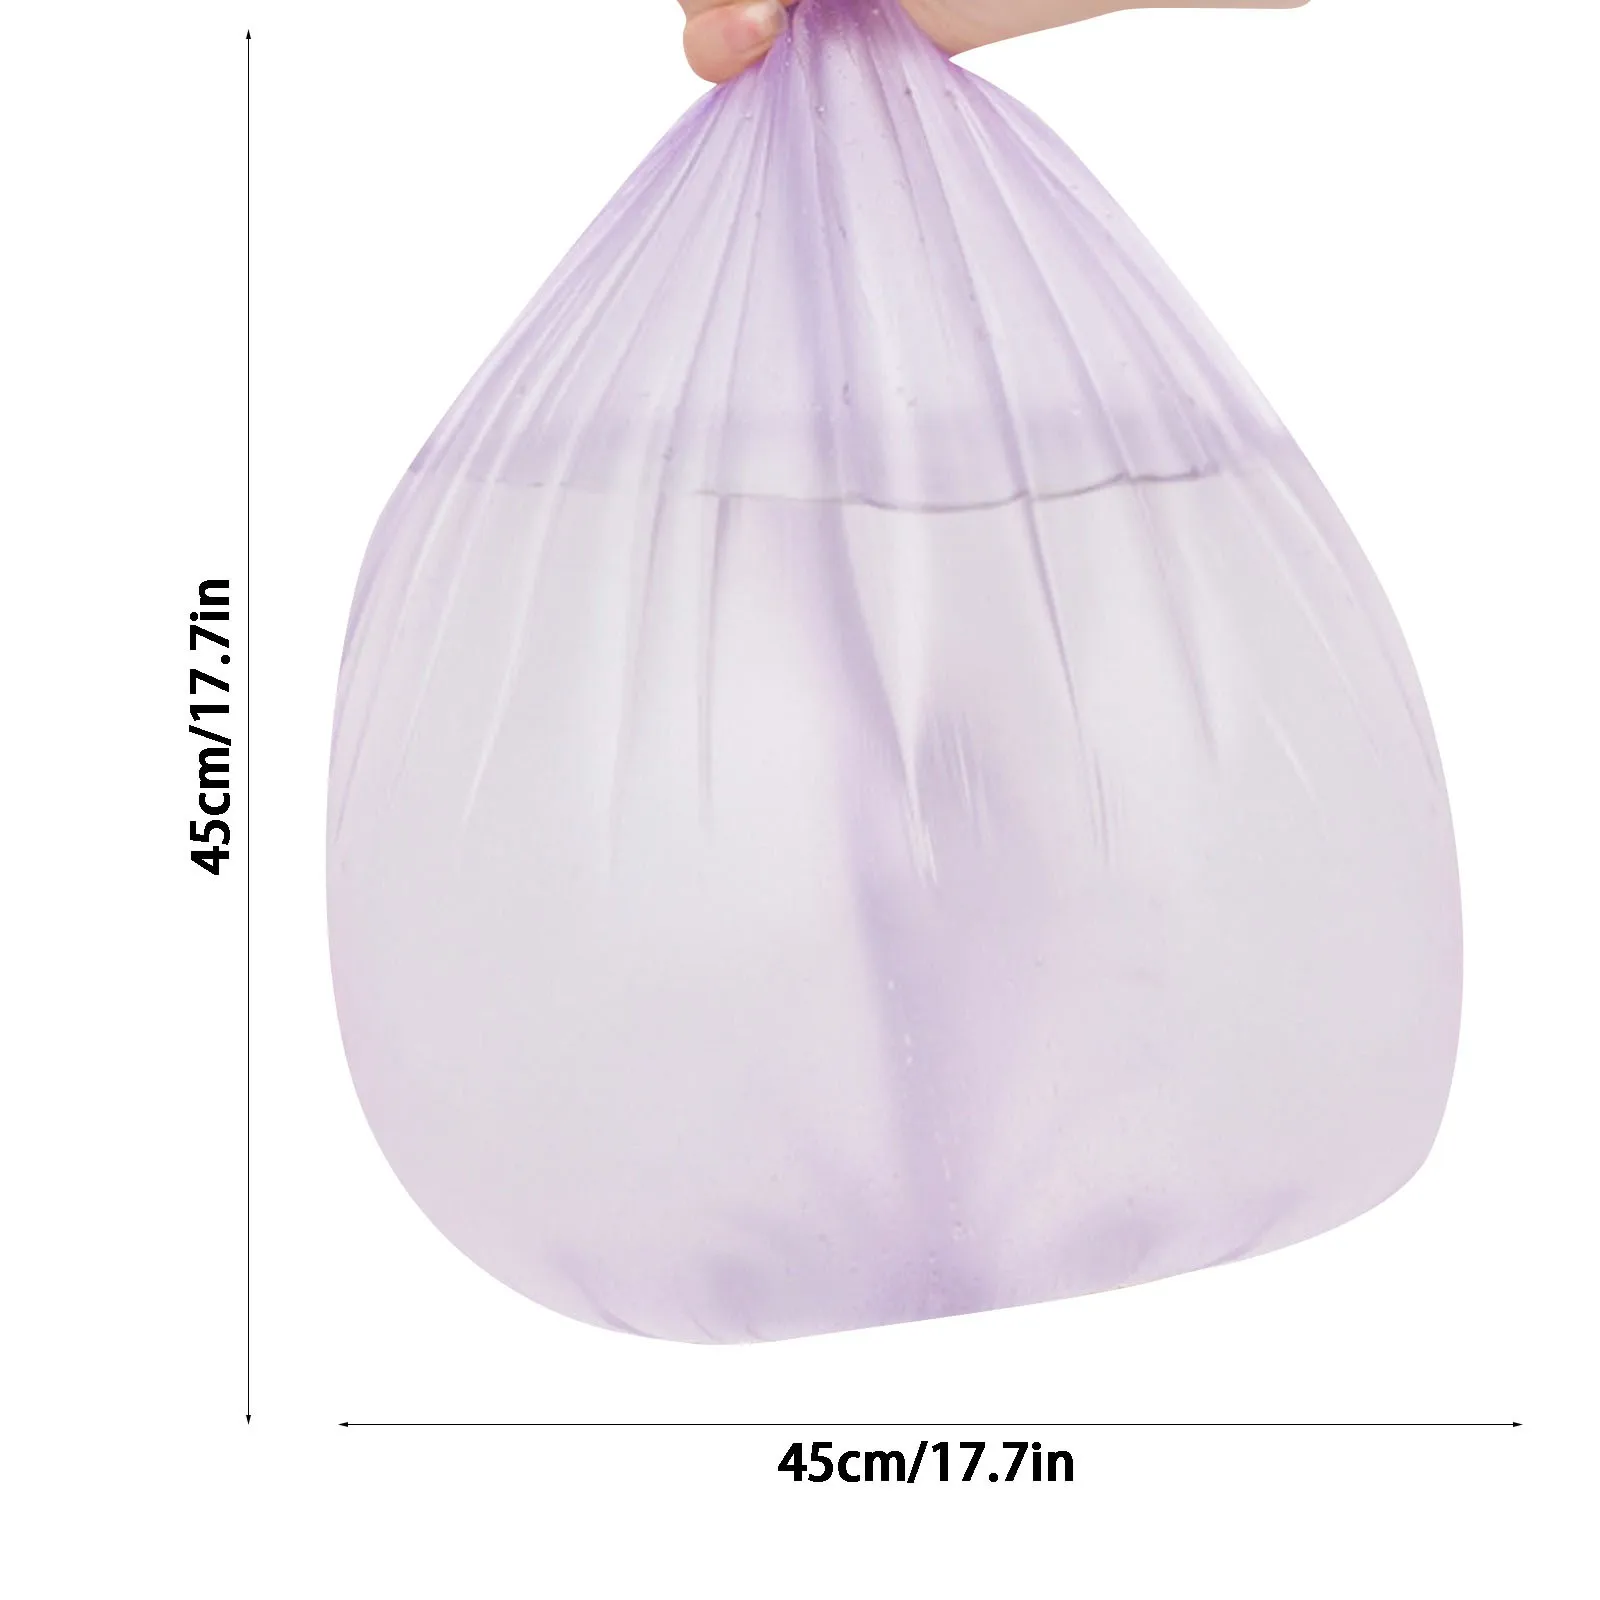 60Pcs Trash Bags 2 Gallon Handle Garbage Bags Trash Can Liners